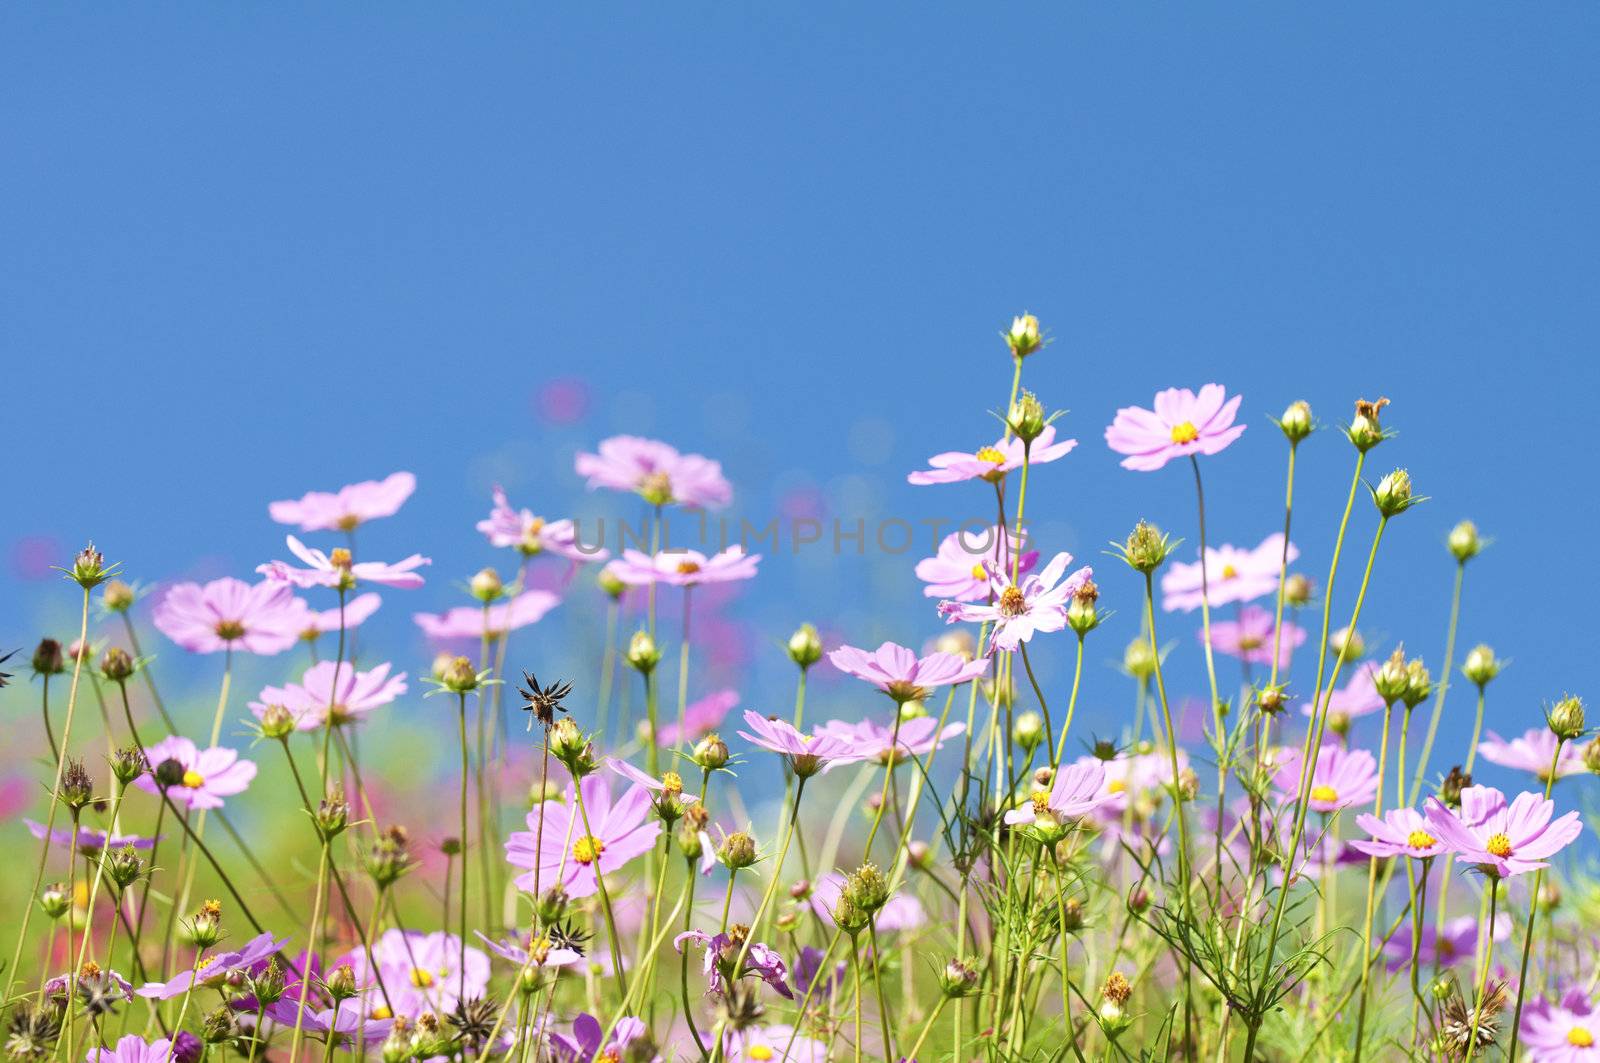 Bunch of spring flowers in the meadow
